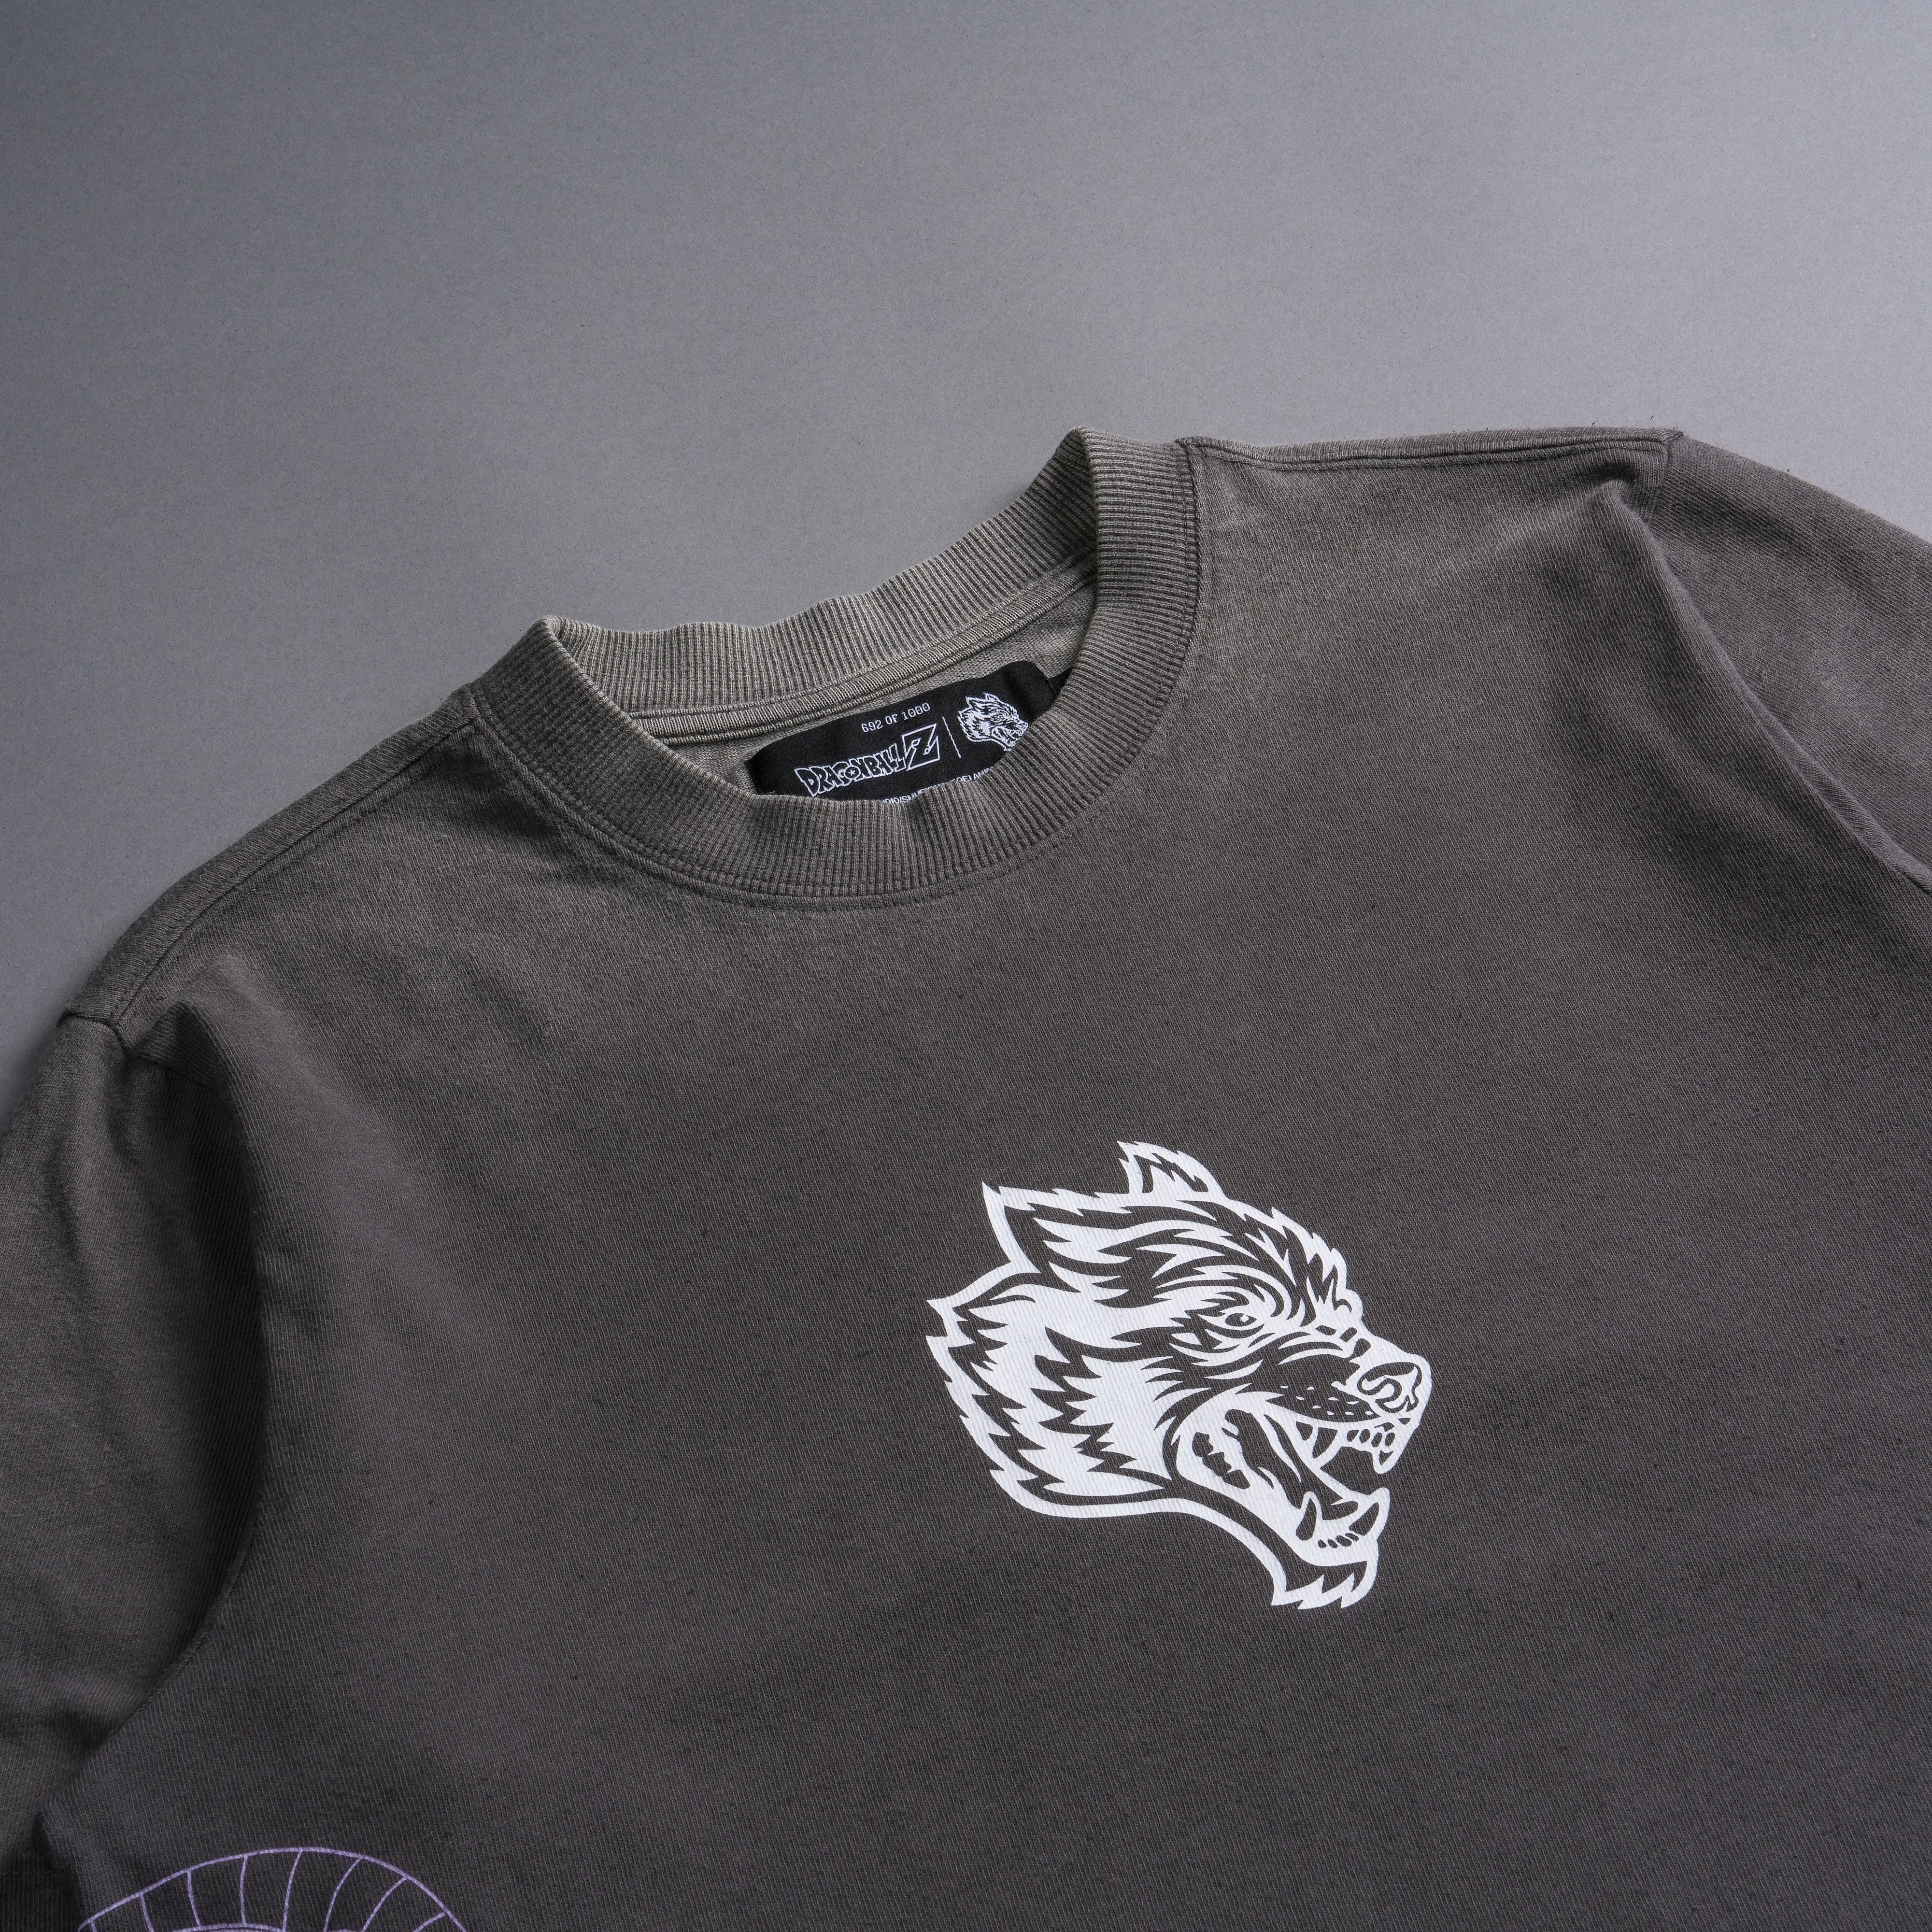 Our Wish "Premium" (Cropped) Tee in Wolf Gray